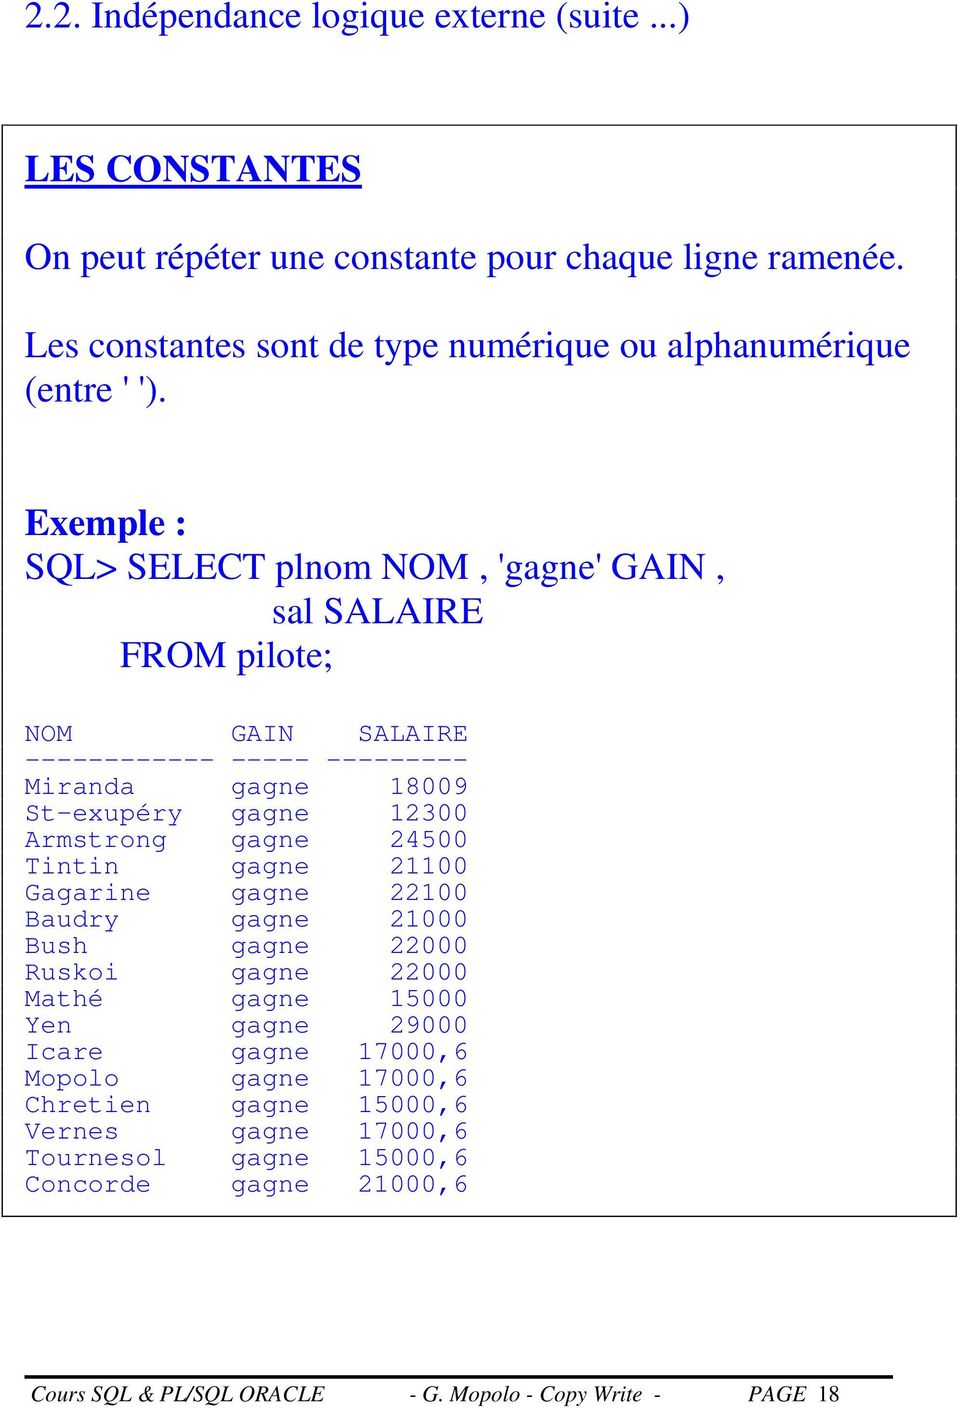 Exemple : SQL> SELECT plnom NOM, 'gagne'gain, sal SALAIRE FROM pilote; NOM GAIN SALAIRE ------------ ----- --------- Miranda gagne 18009 St-exupéry gagne 12300 Armstrong